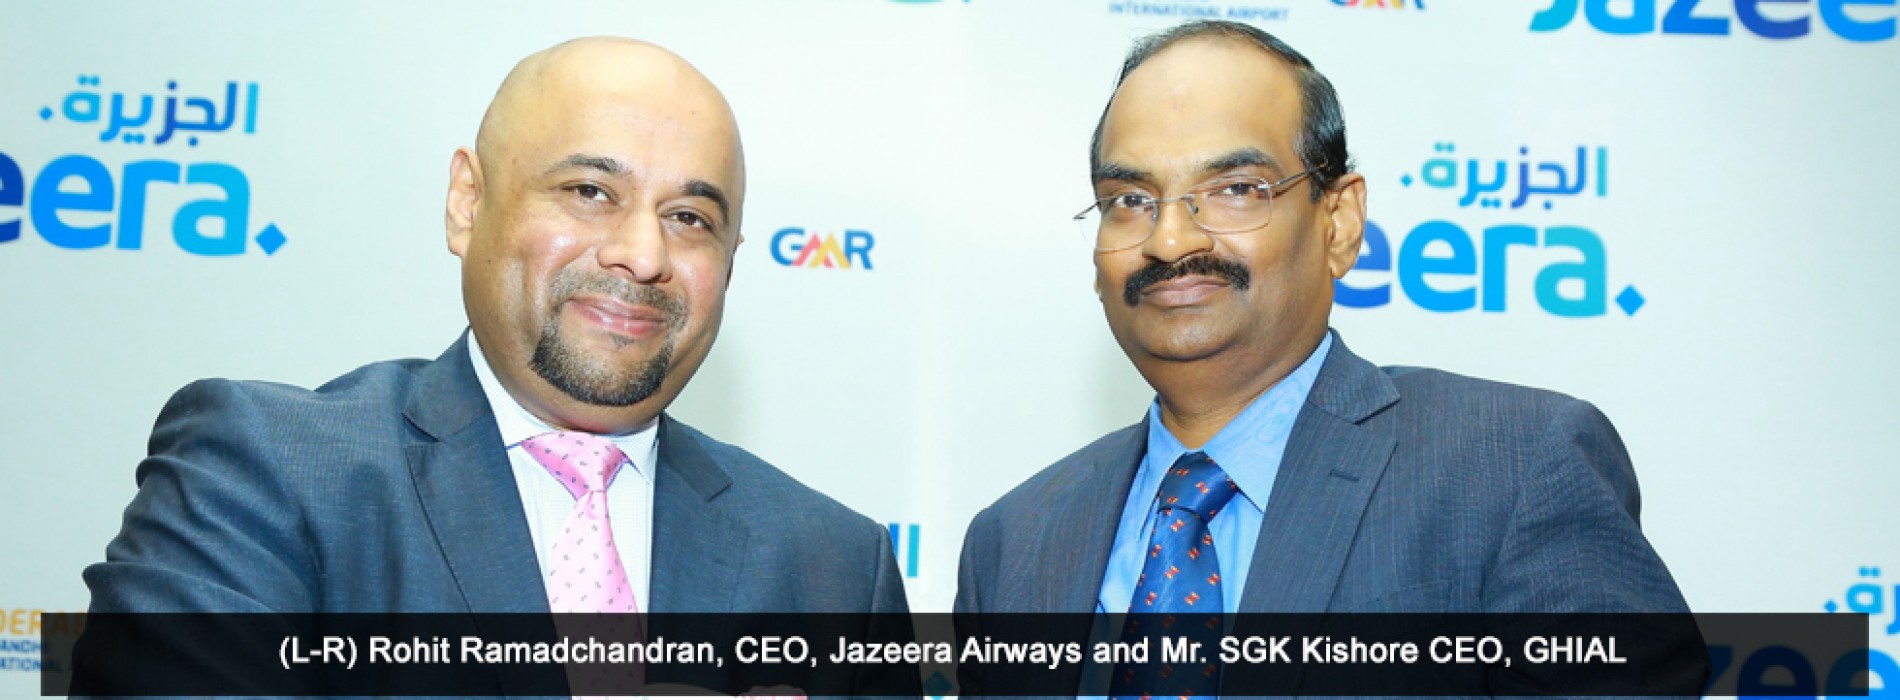 Kuwait’s Jazeera Airways connects to India with Daily flights to Hyderabad